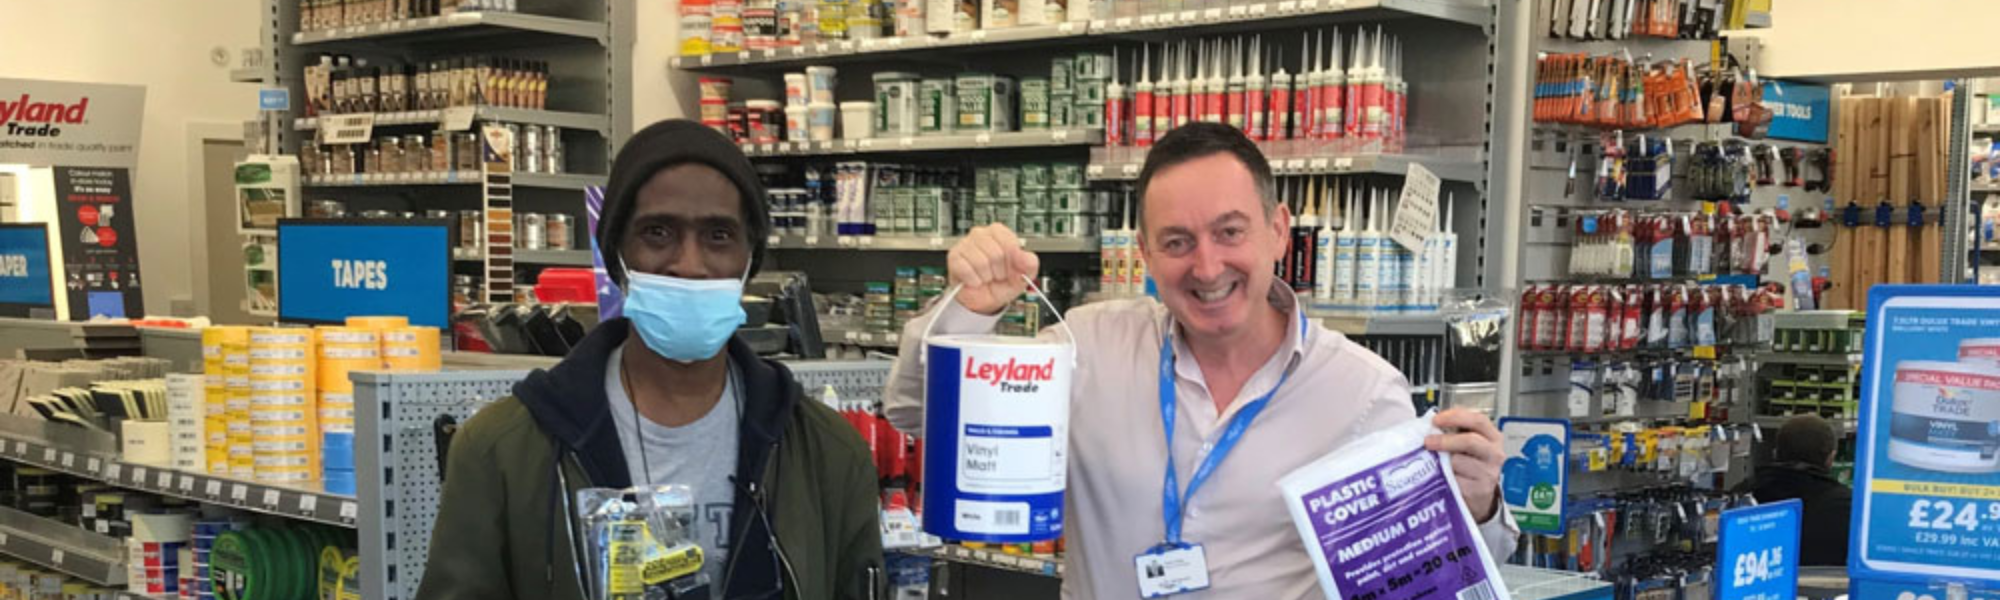 Leyland SDM helps charity paint brighter future